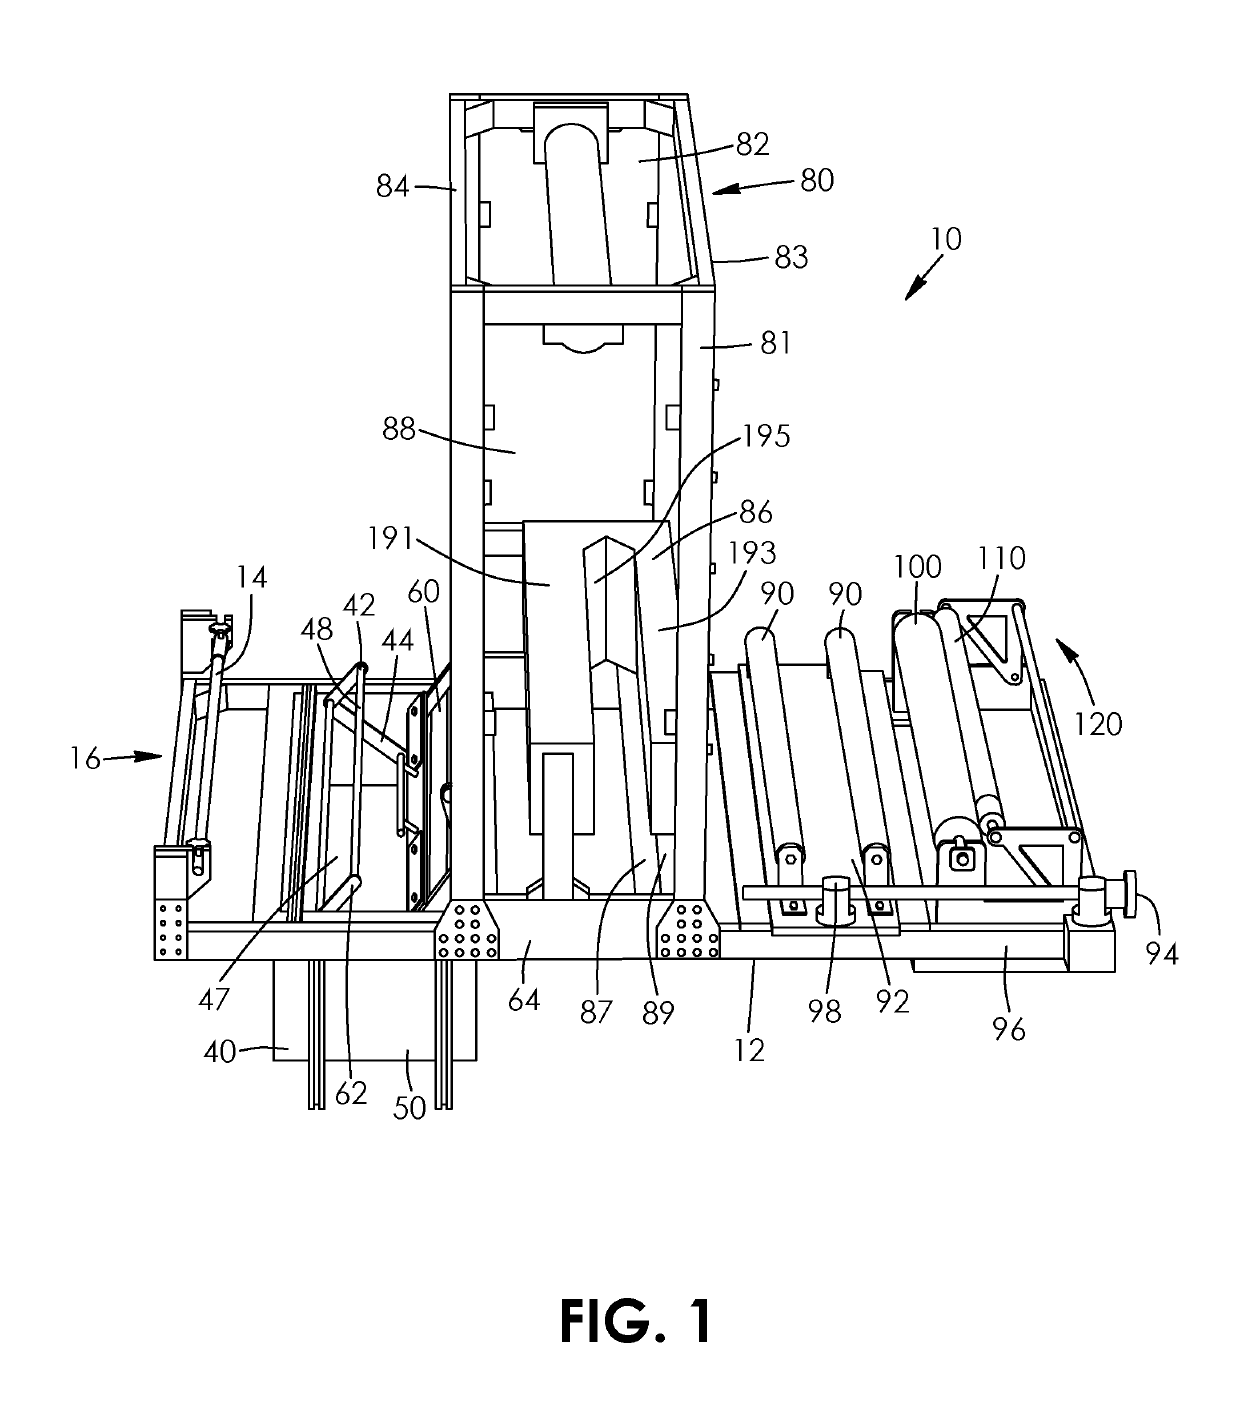 Apparatus for automated production of a roll of waxed fabric